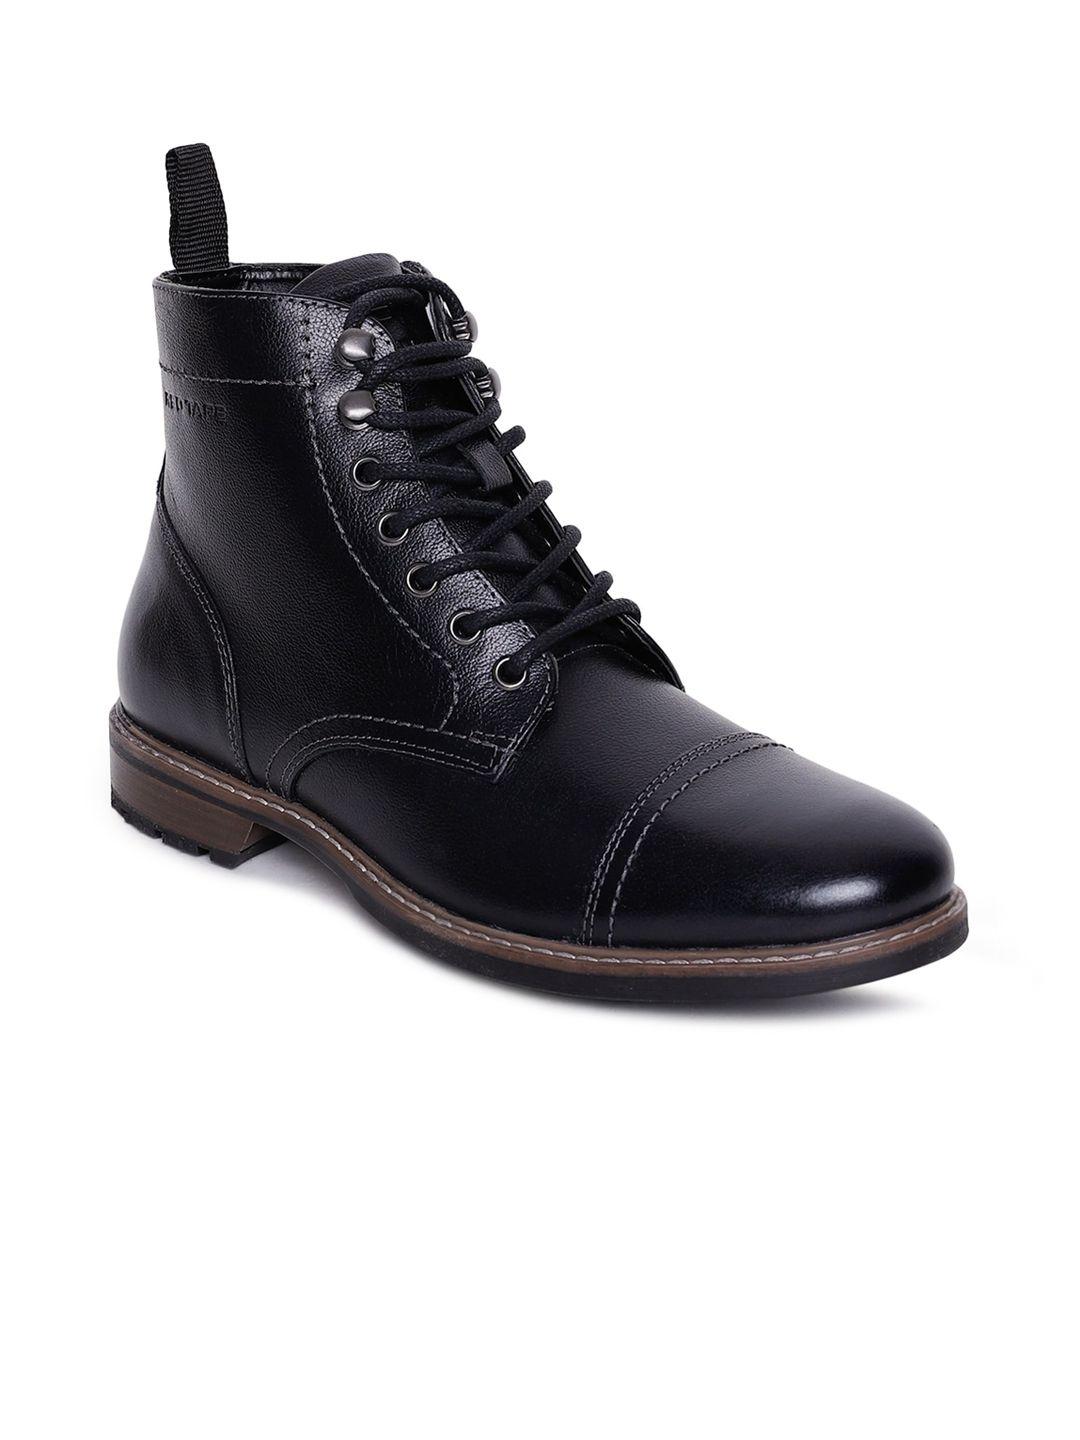 red tape men black leather flat boots